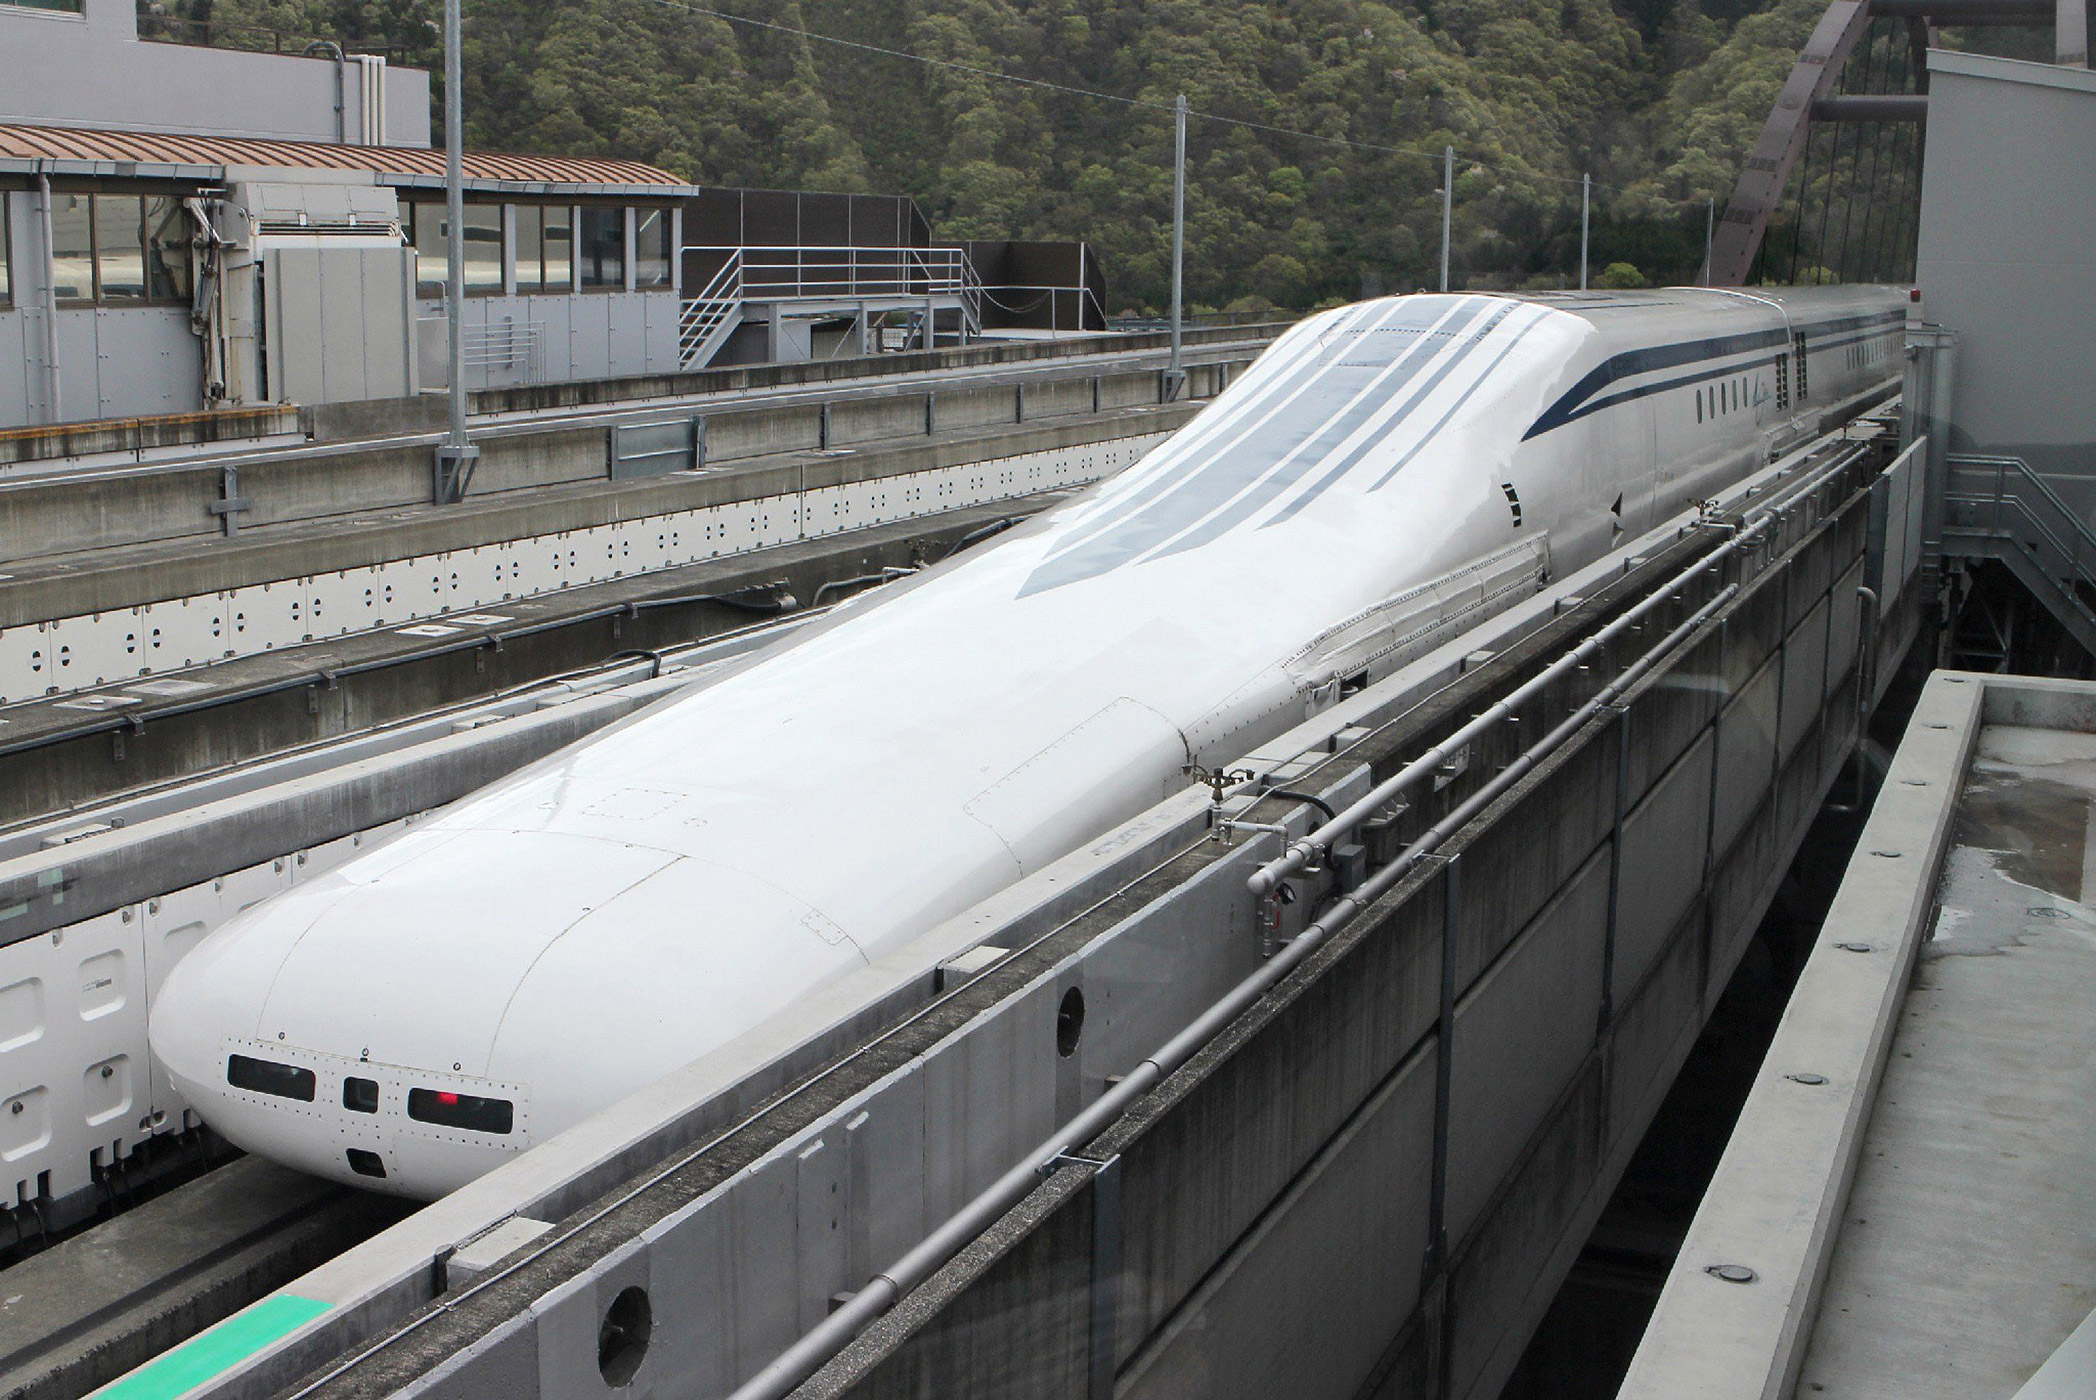 Central Japan Railway's seven-car maglev train returns to the station after setting a new world speed record in a test run near Mount Fuji  on April 21, 2015. (Jiji Press—AFP/Getty Images)